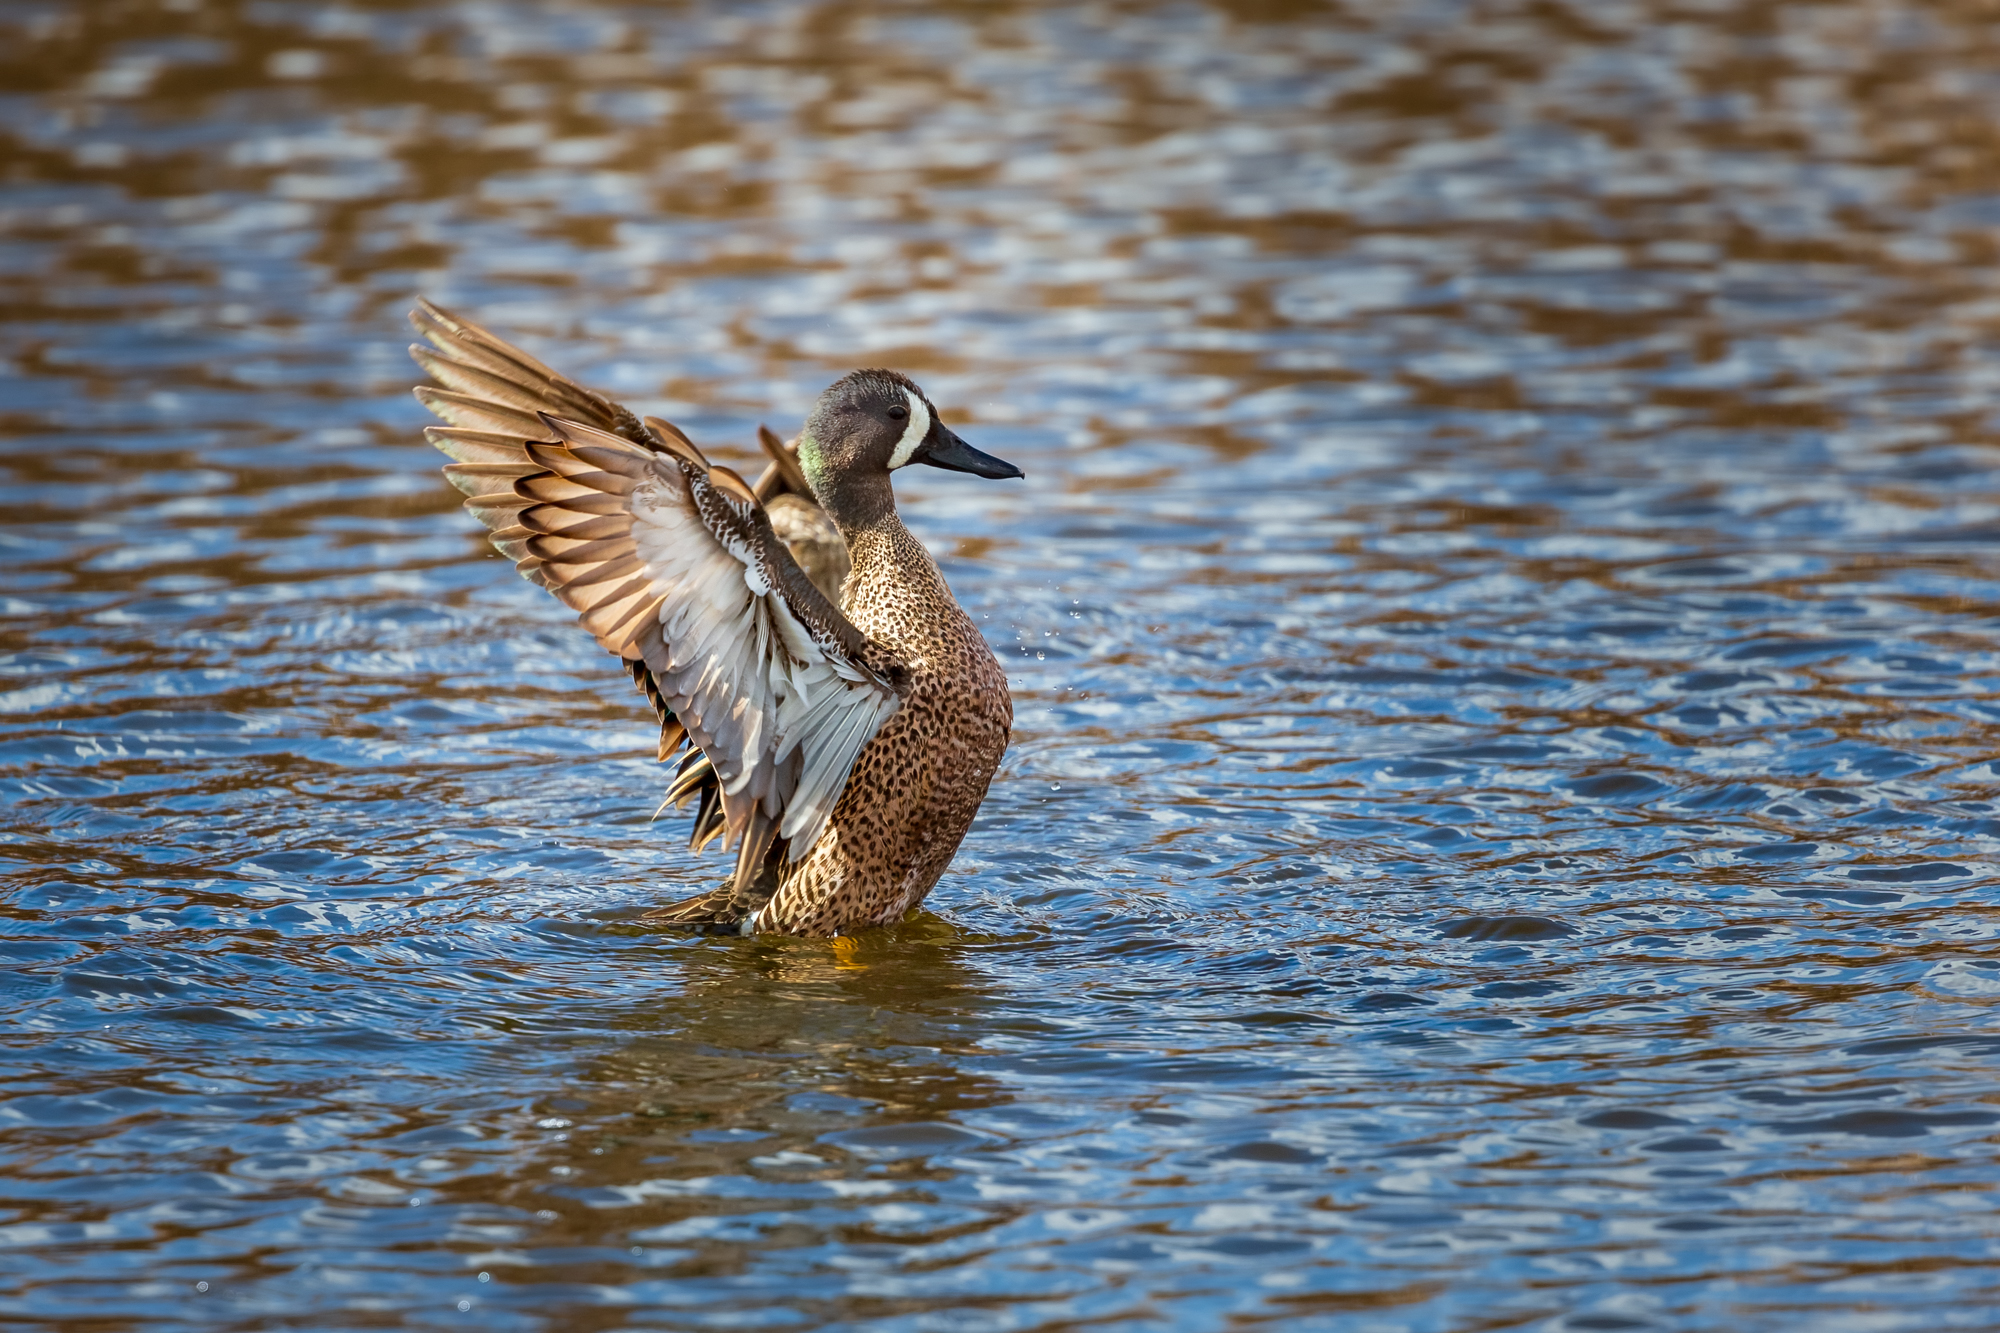 Blue-winged Teal in water, with their wings spread.